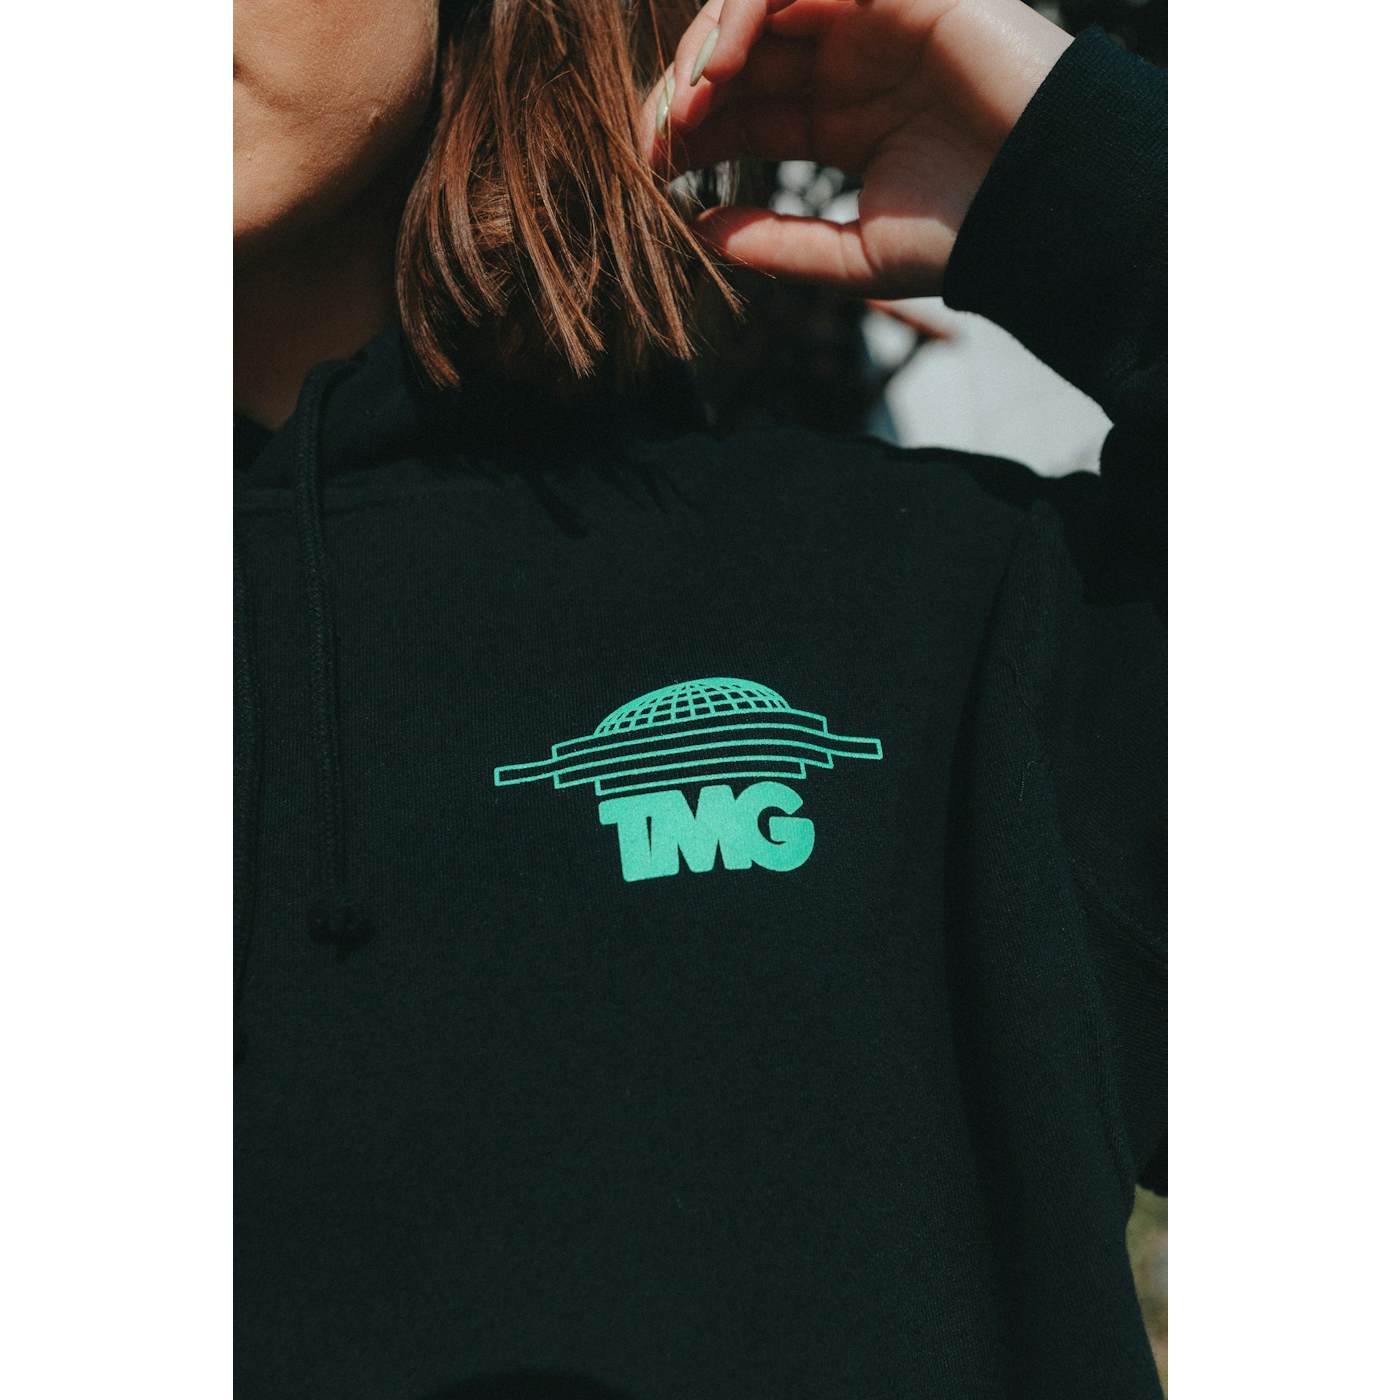 Tiny Meat Gang Delusions Expansion Black Hoodie (Green Print)